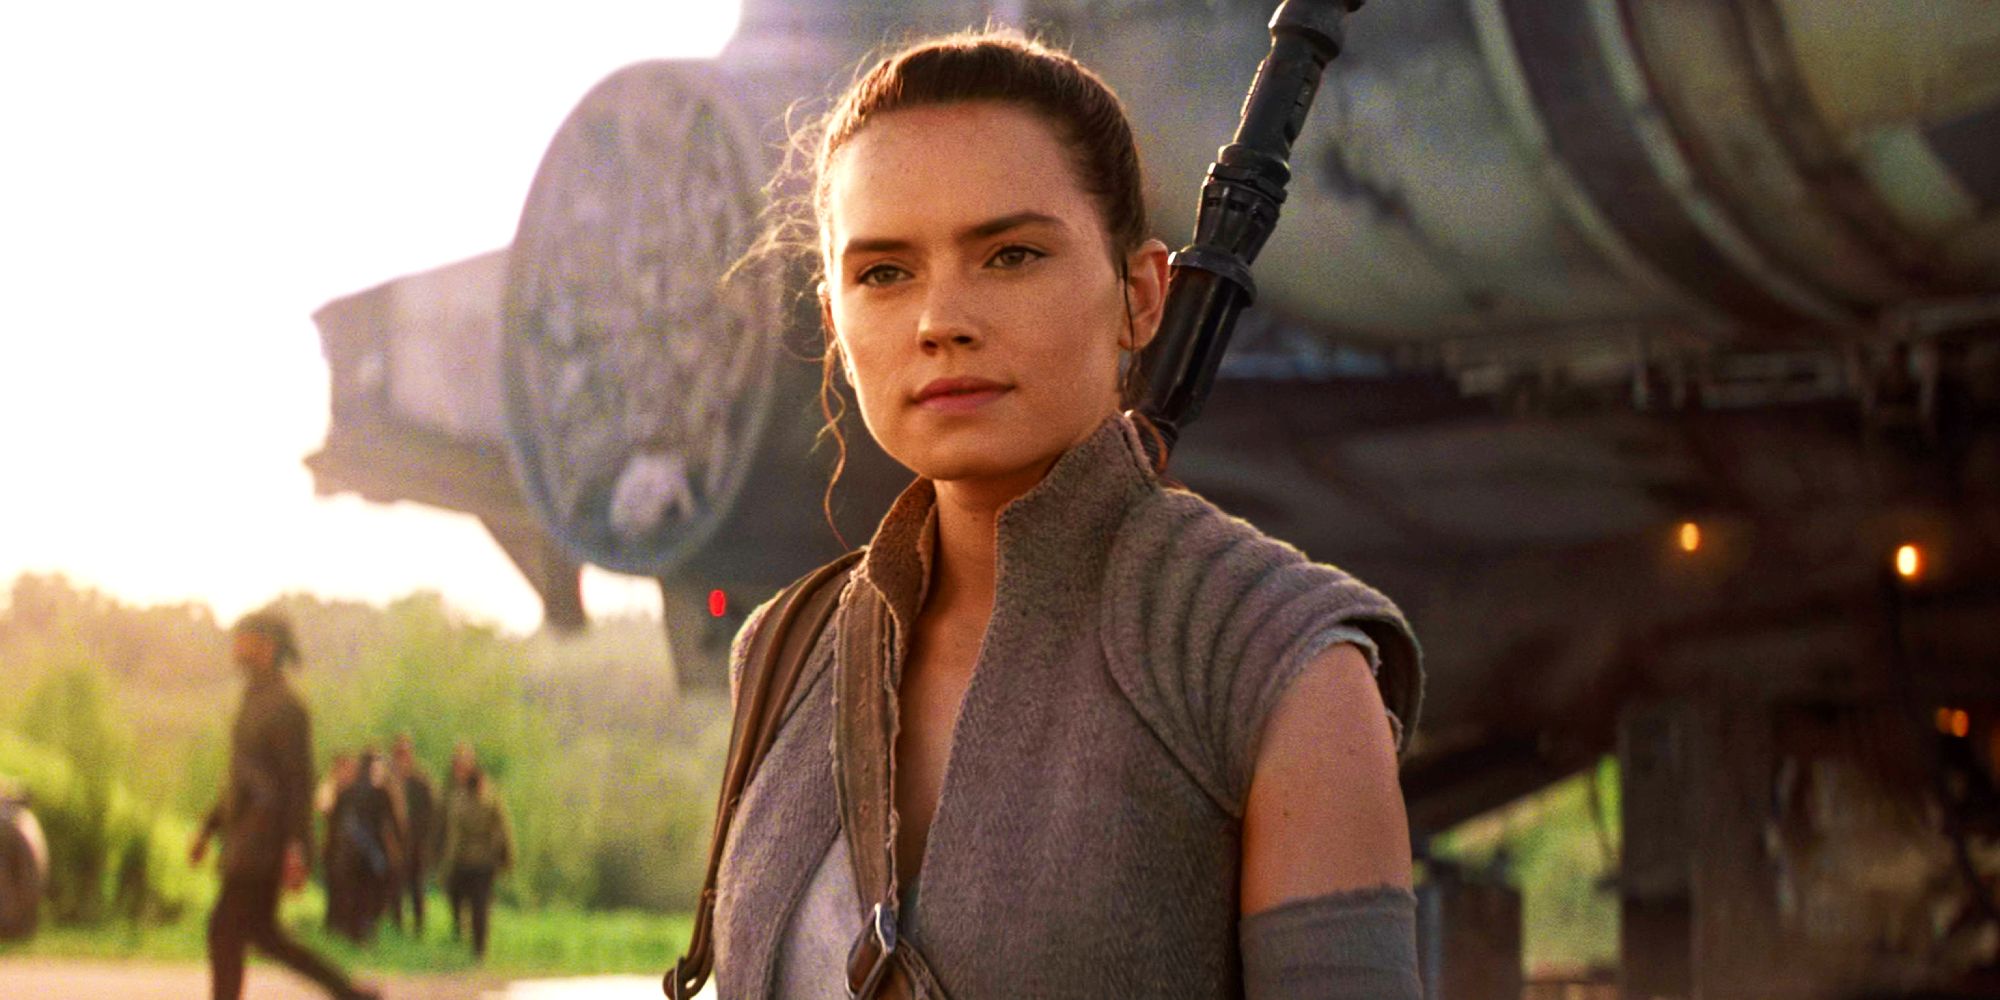 Daisy Ridley as Rey in Star Wars The Force Awakens in front of Millennium Falcon.